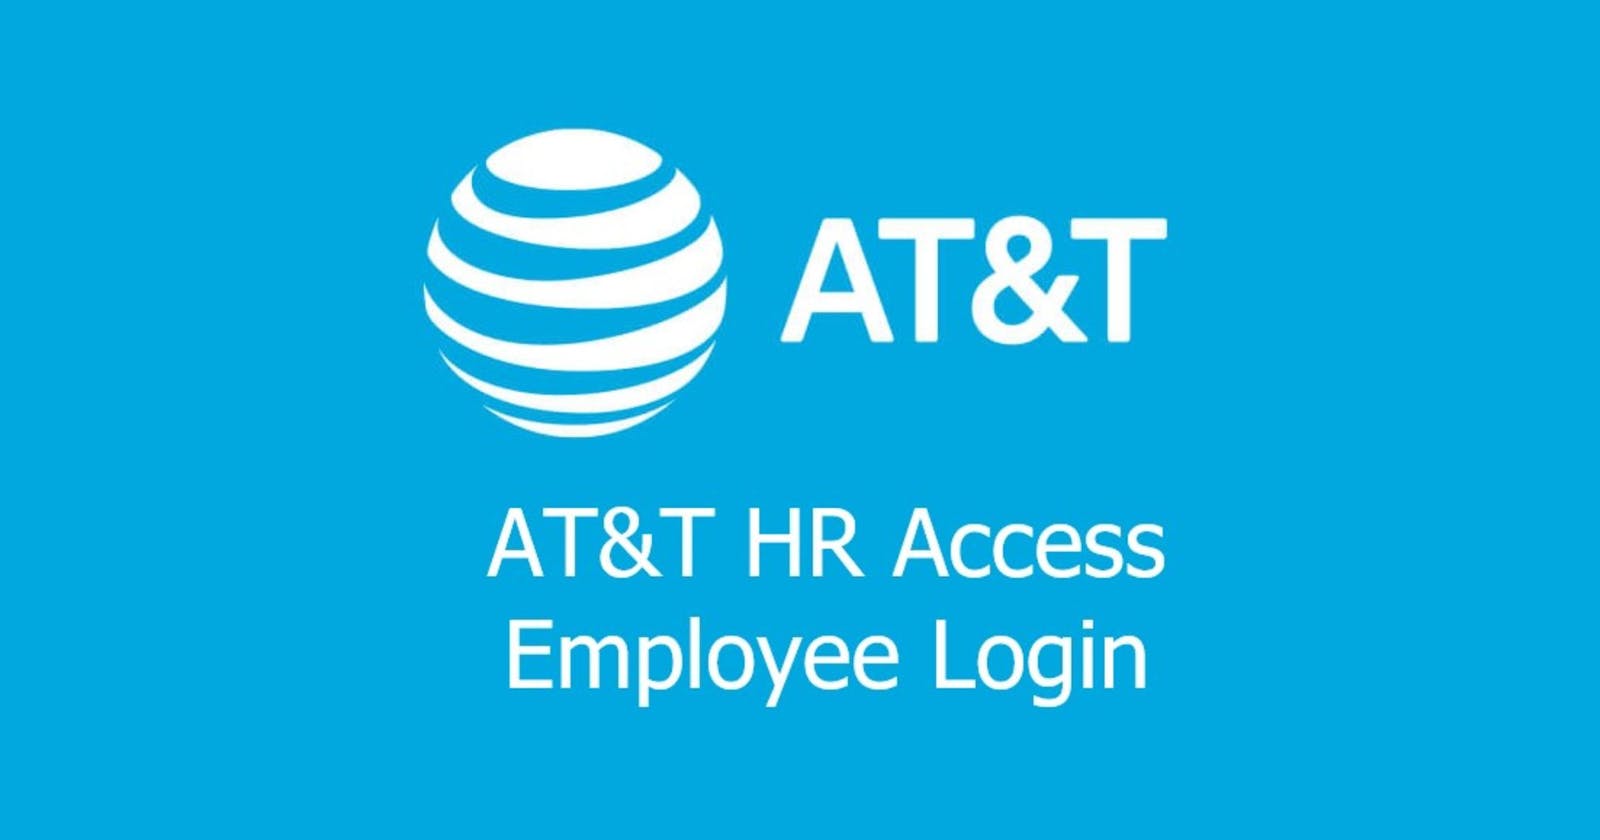 What is att hr one stop and how to login employee portal